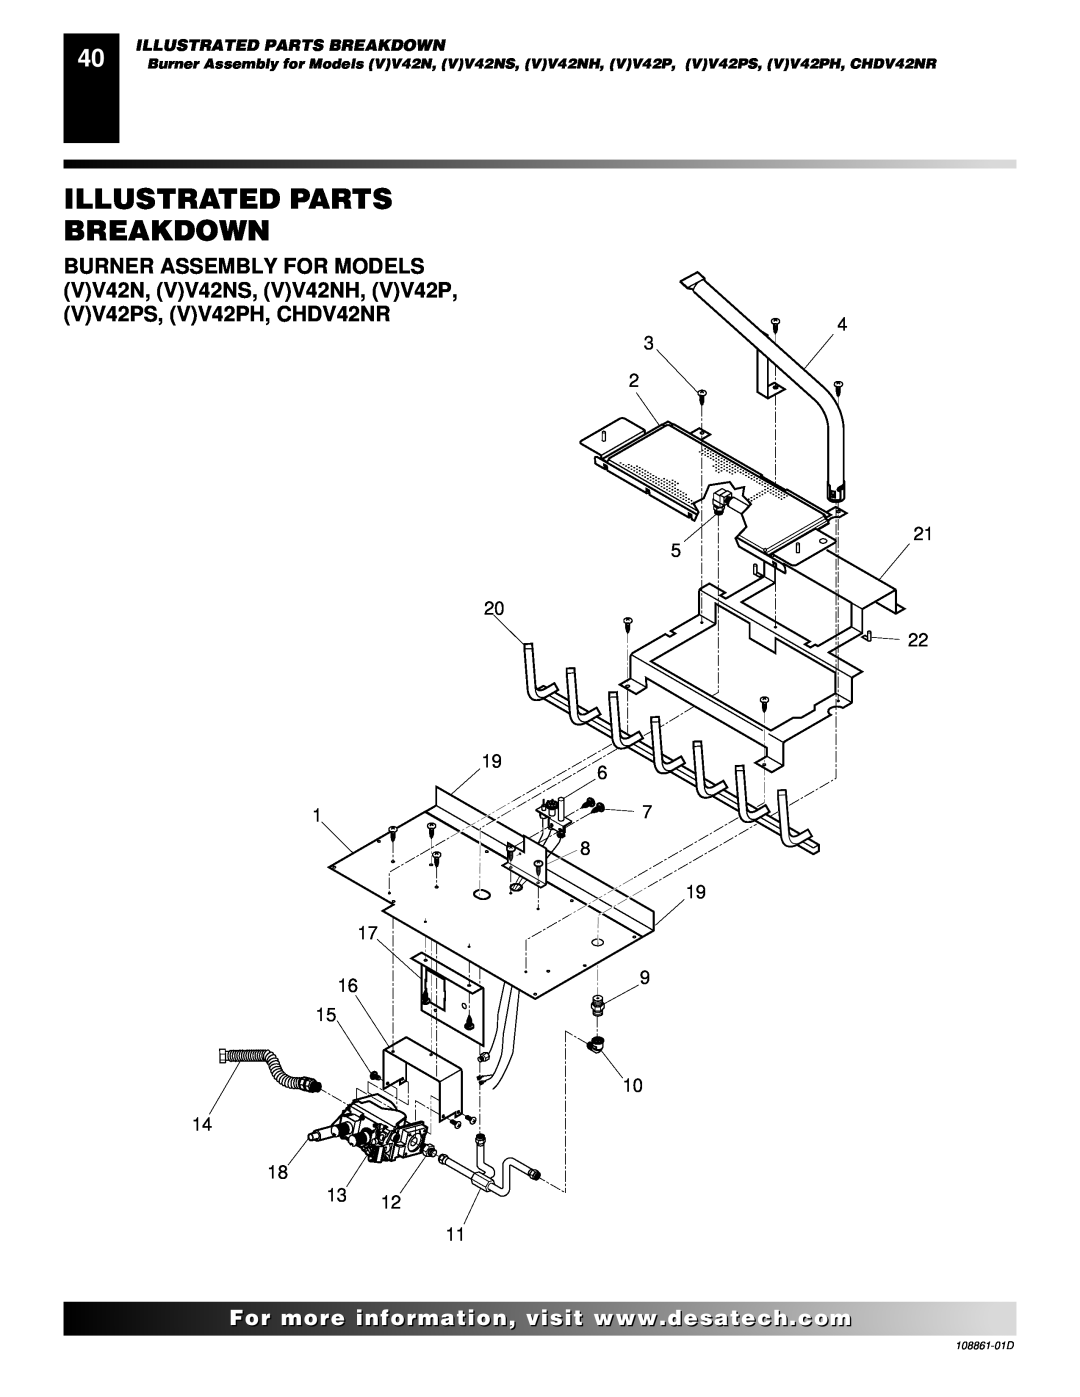 Desa (V)V42P, (V)V42N, (V)V36P, CHDV36NR, CHDV42NR installation manual Illustrated Parts Breakdown, 20 19 1, 4 3, 108861-01D 